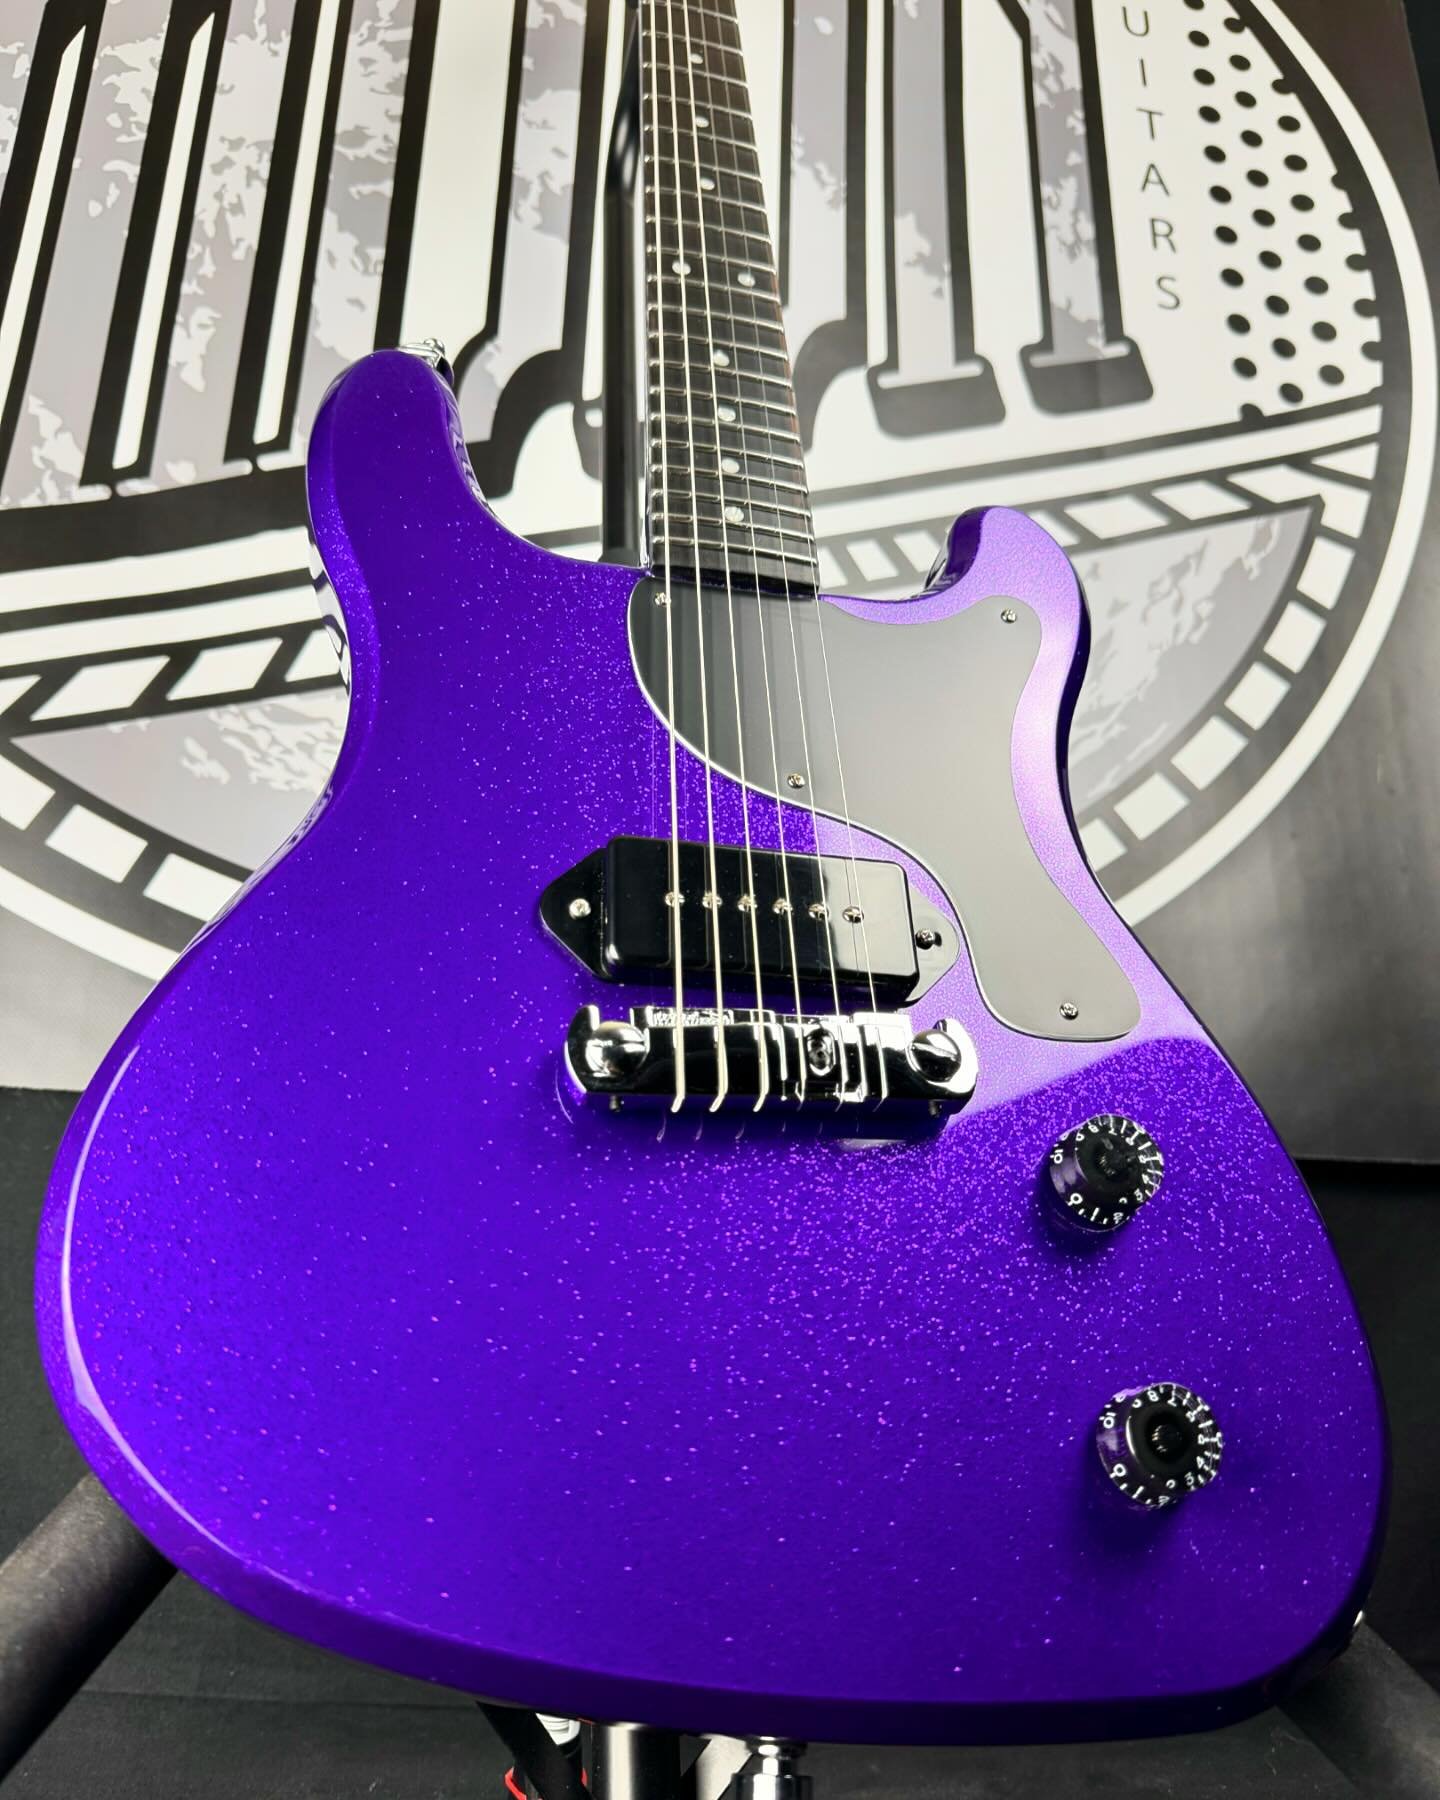 In 2022 I temporarily took over another NJ guitar company (long story) with very different model shapes than what I offer with Moon, and this is the last straggler custom order from that ordeal. 

*This build is a one-off and I will not be making any